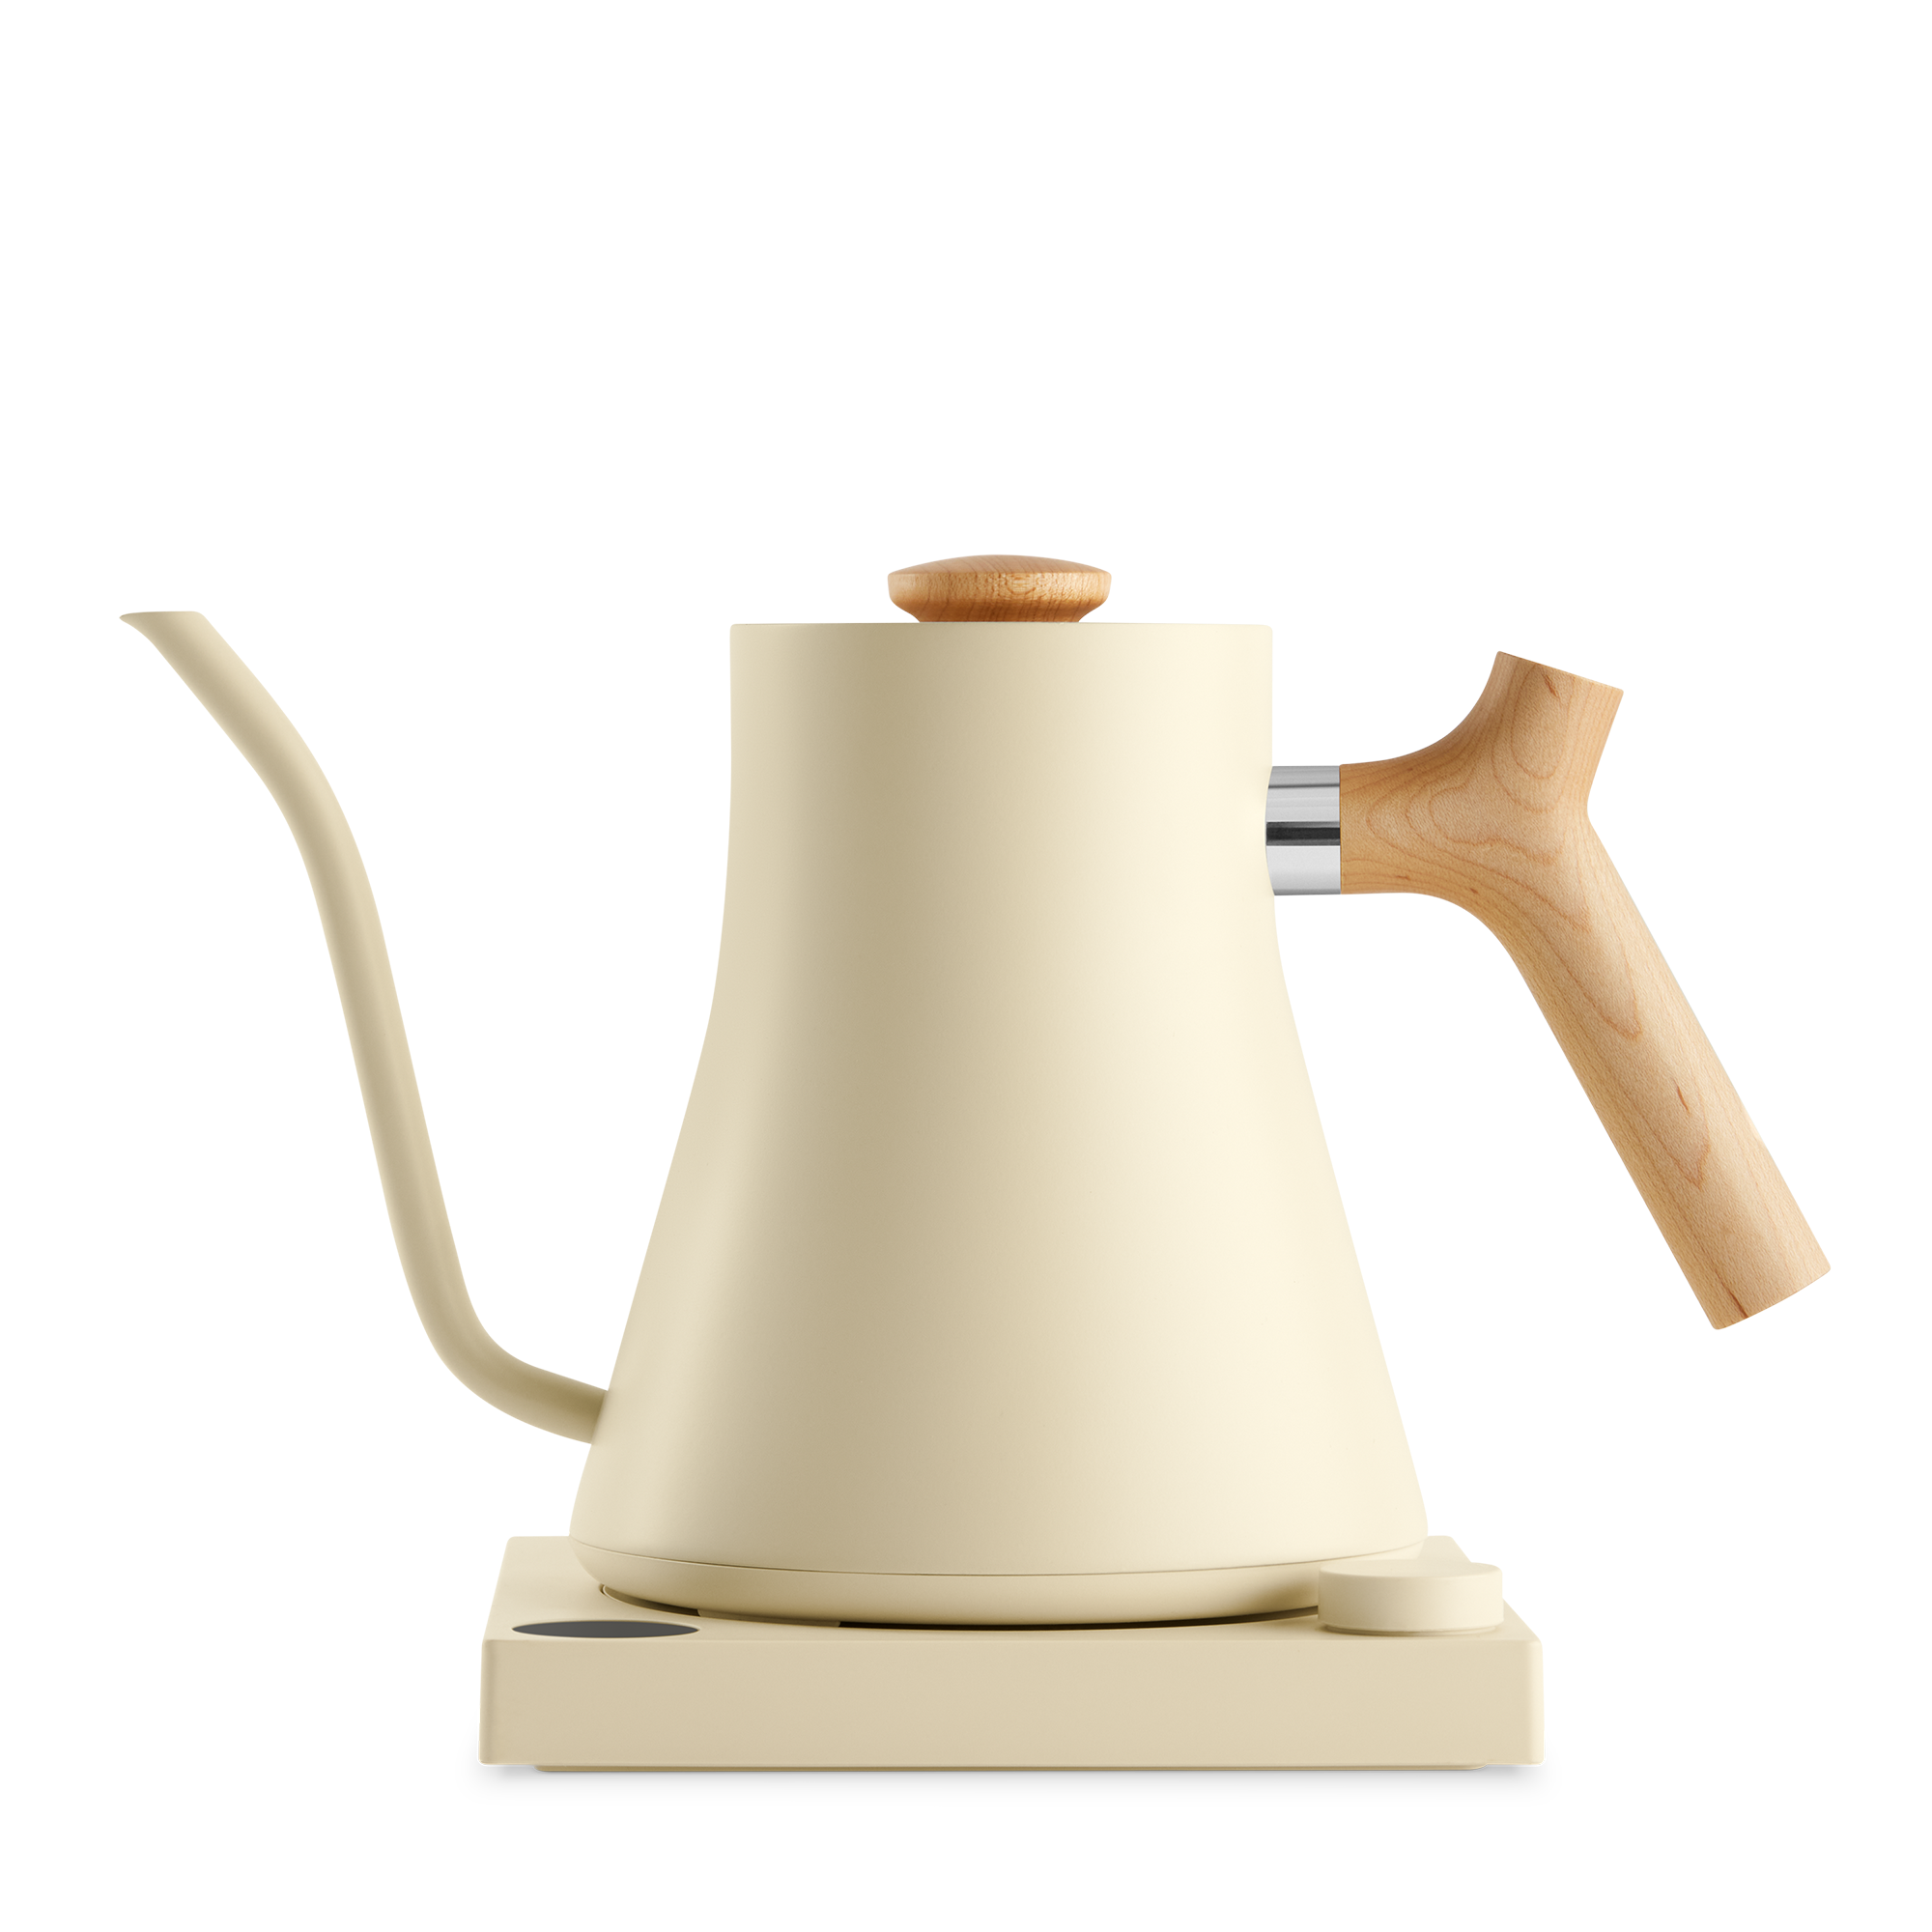 Stagg EKG Electric Kettle - Wooden Accents: Sweet Cream + Maple / Stagg EKG 0.9 L